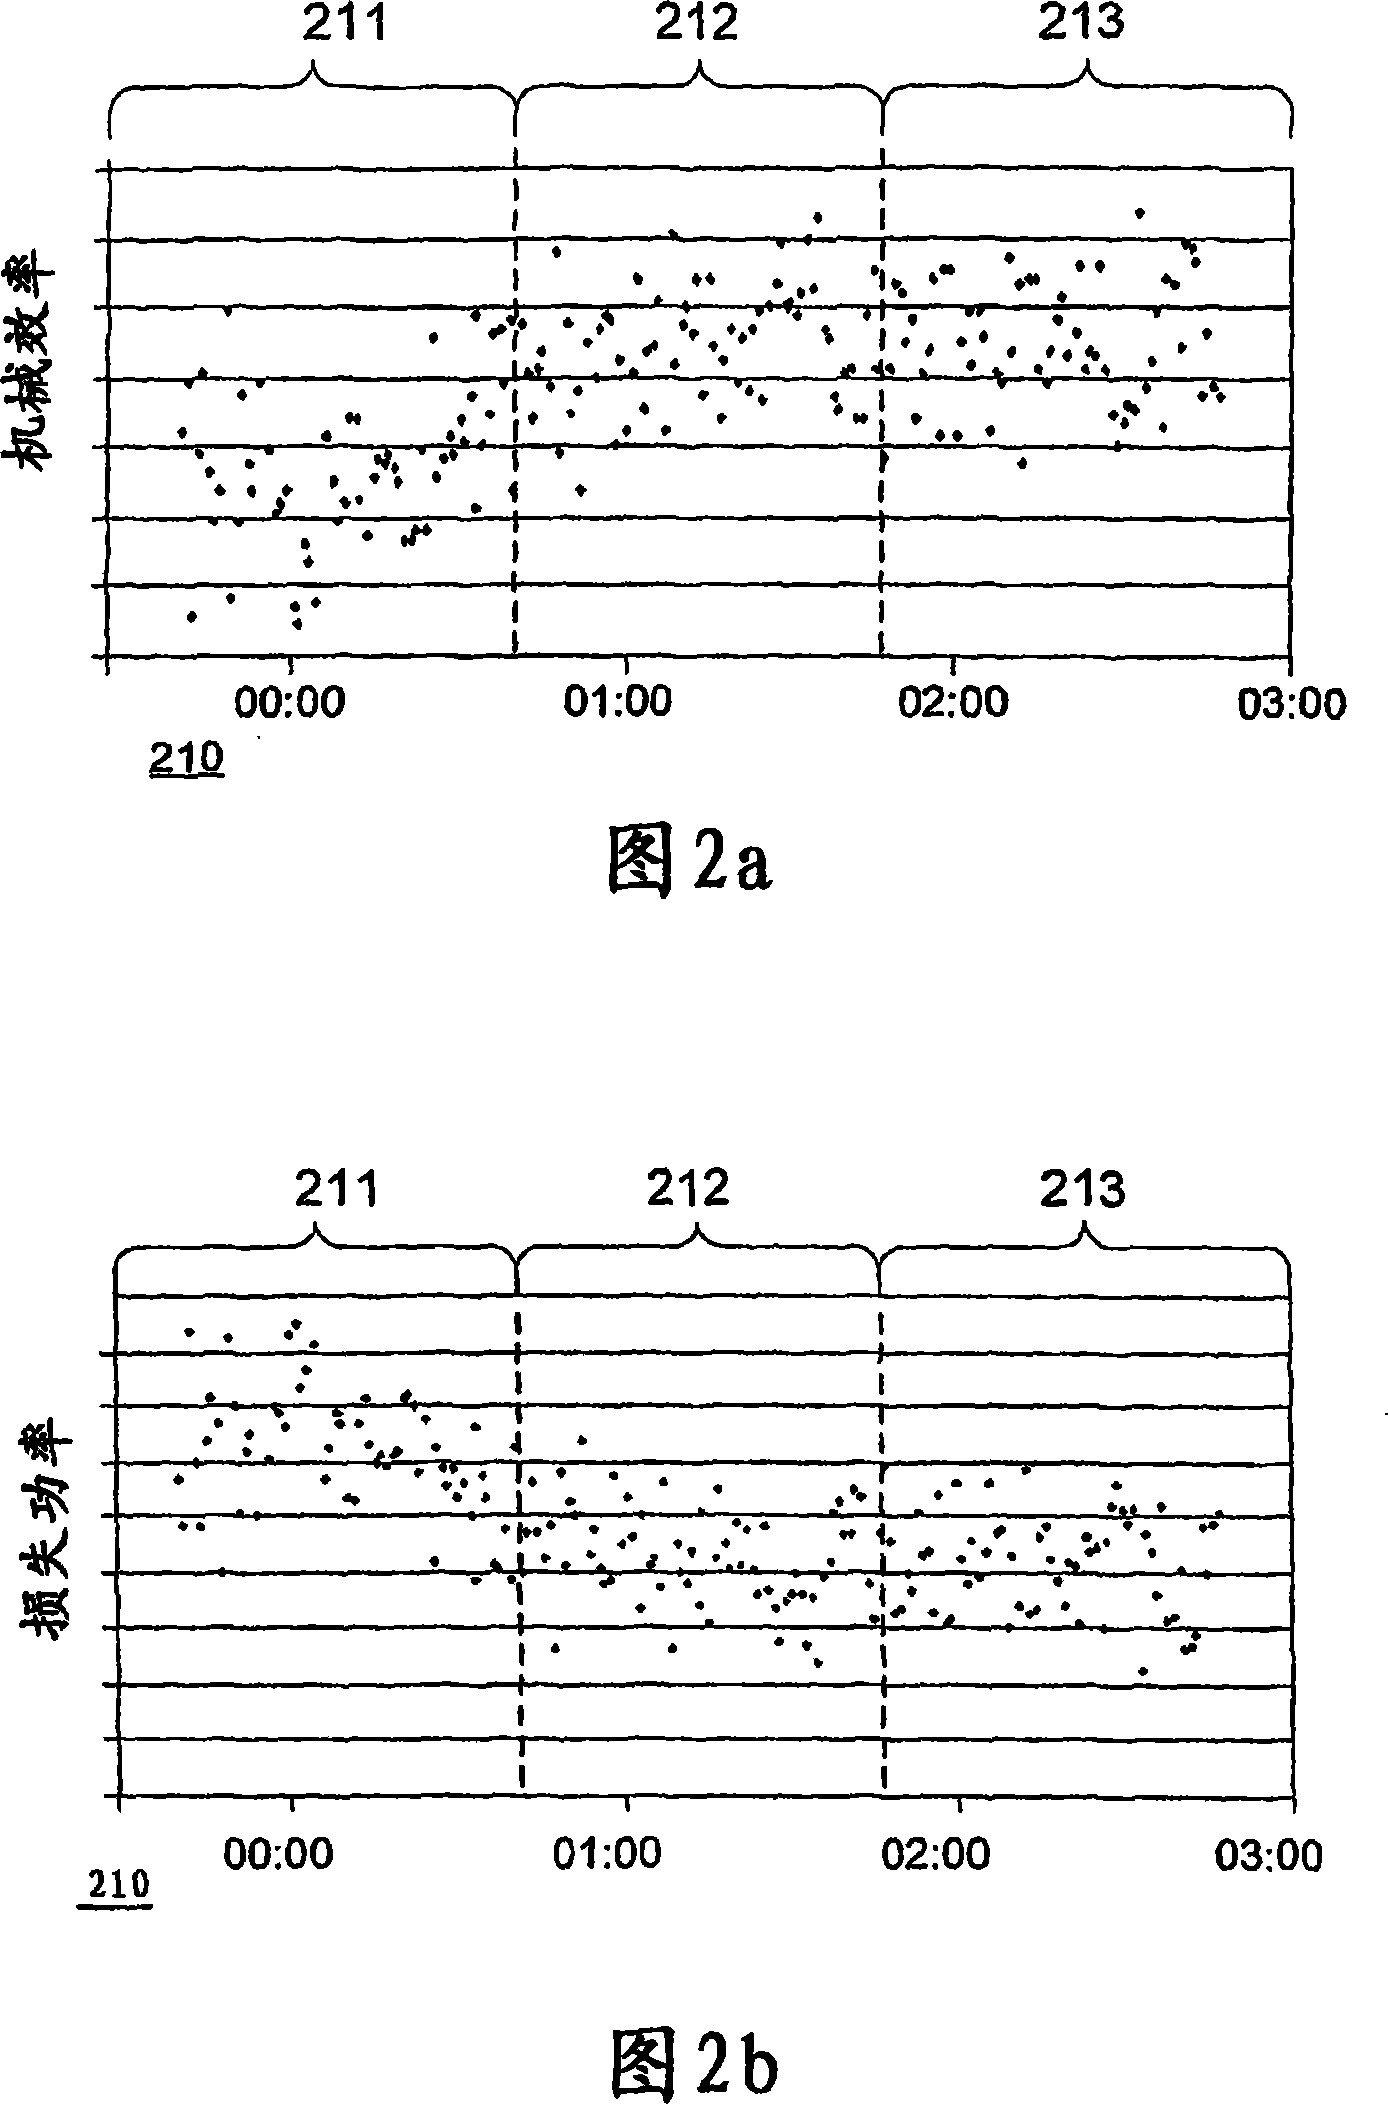 Method and system for improving fuel economy and environmental impact operating a 2-stroke engine